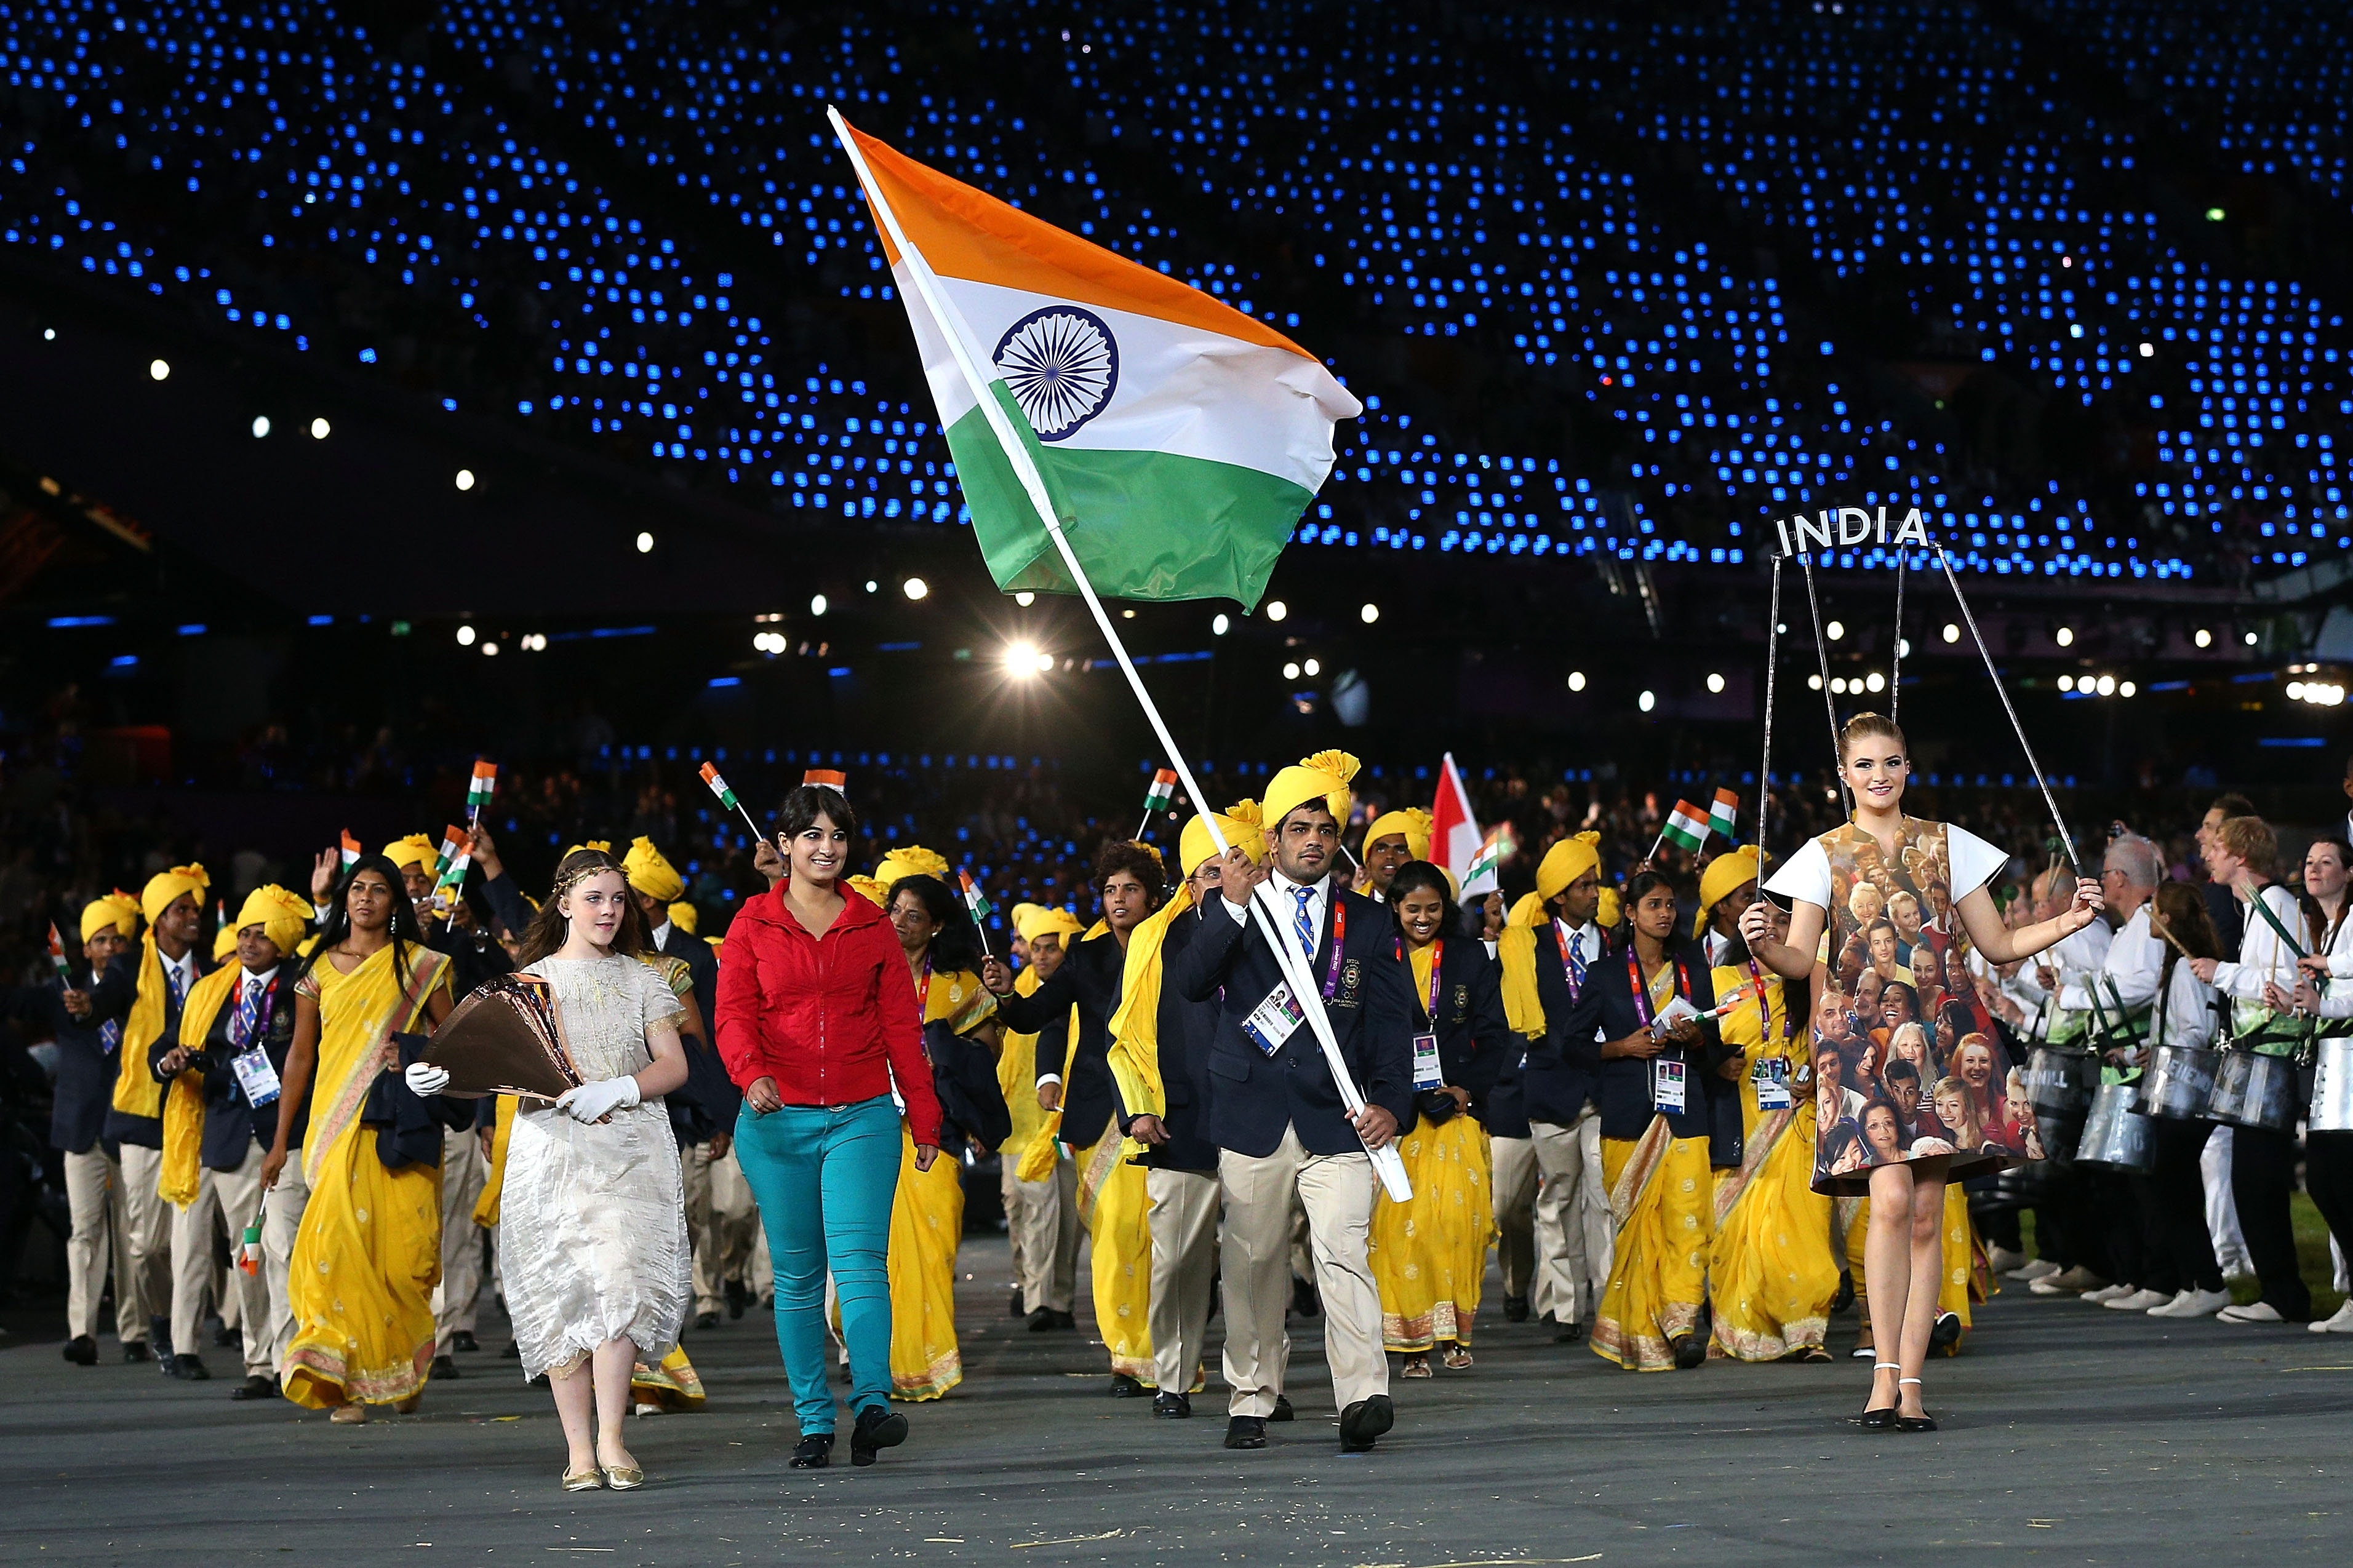 2016 Olympics | Full list of athletes who will represent India at Rio